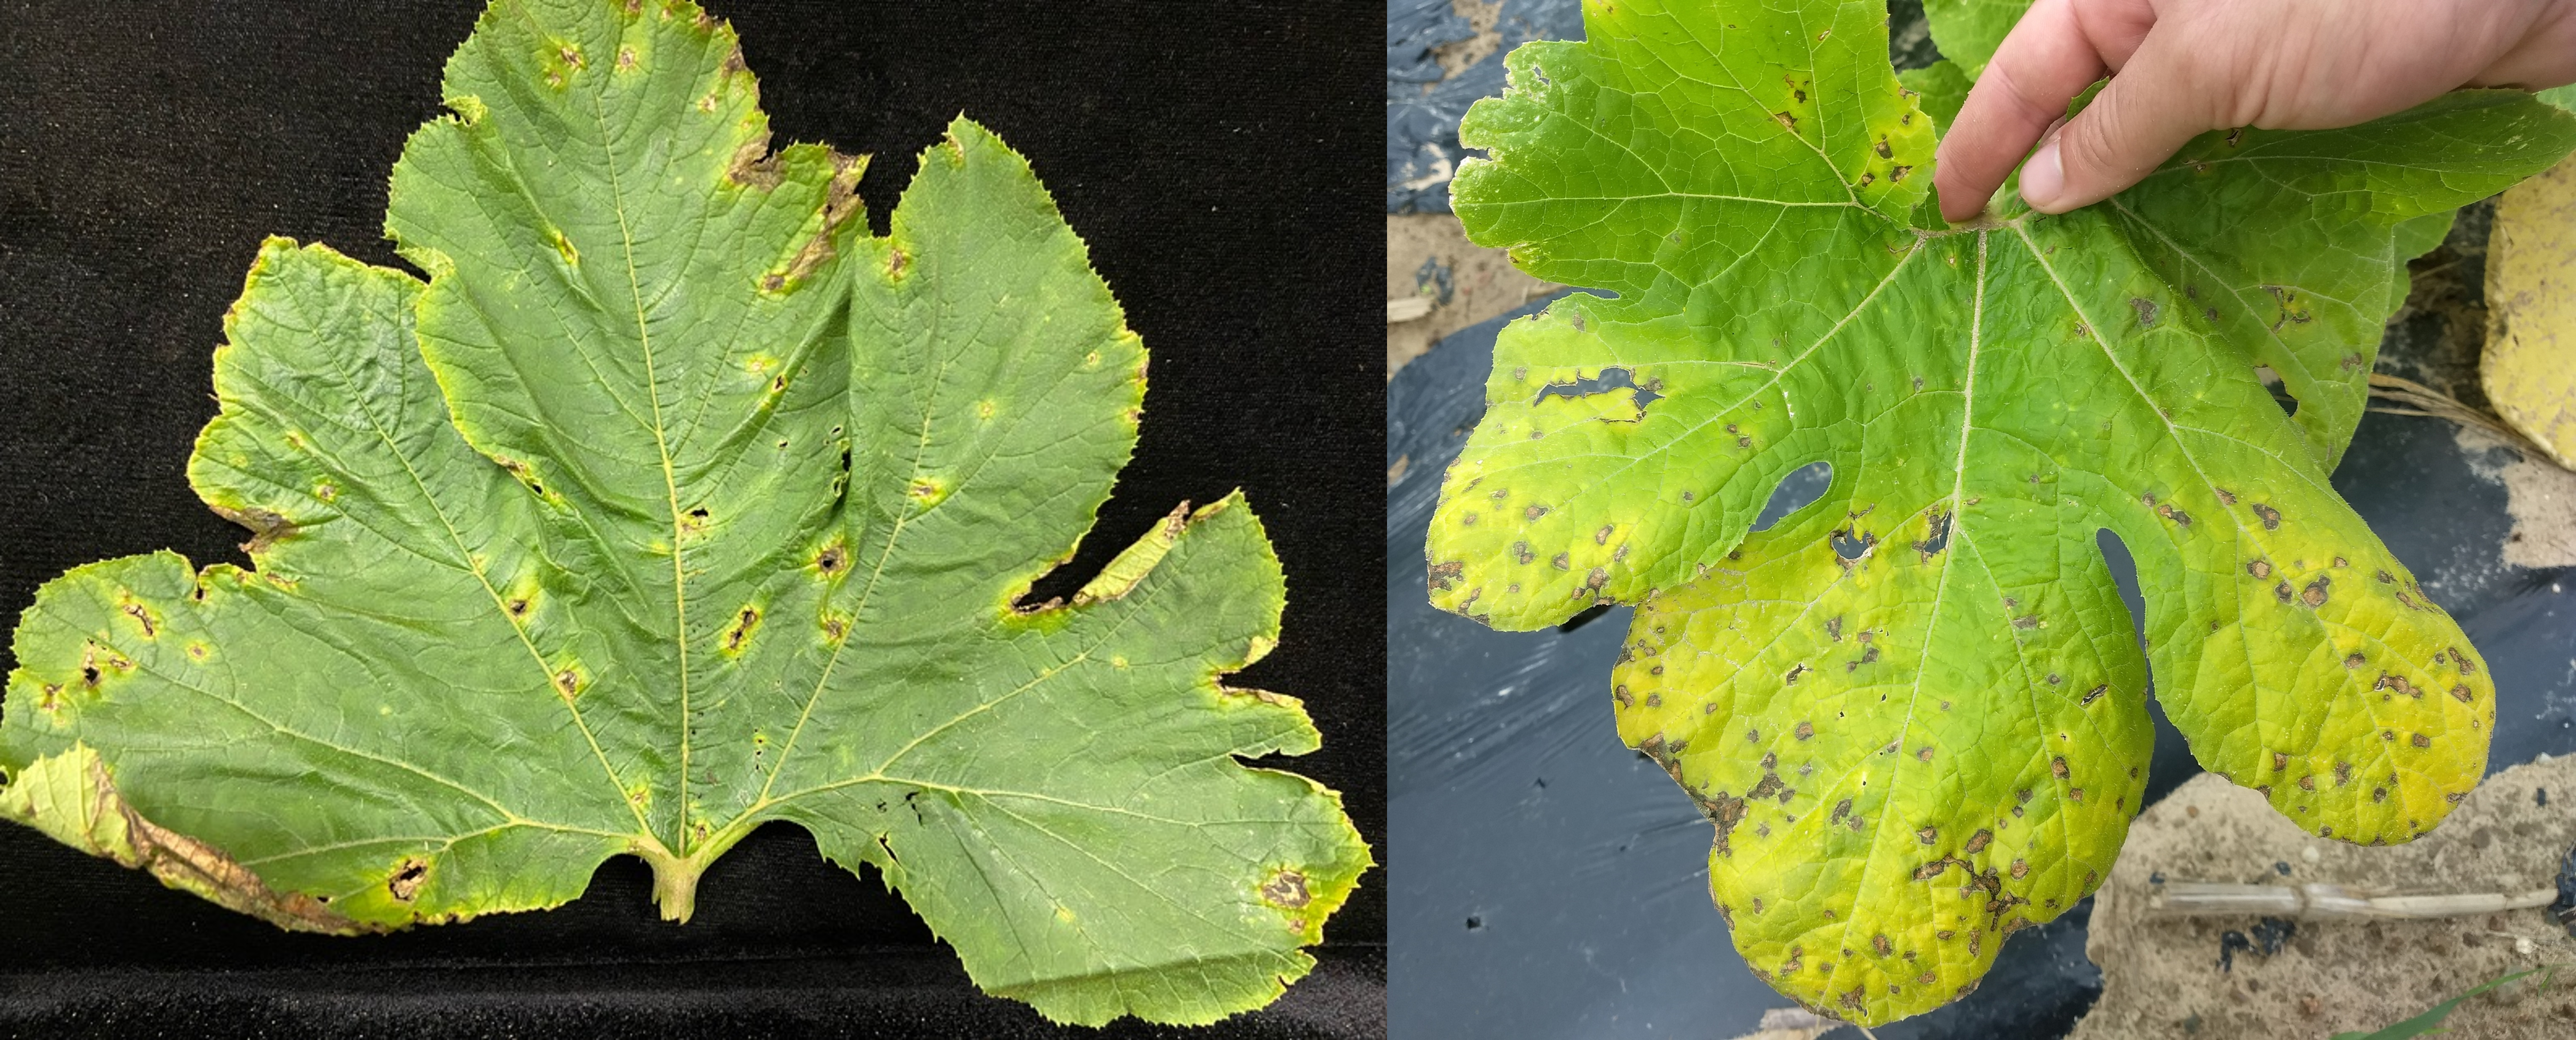 Necrotic lesions surrounded by chlorotic halos on leaves.